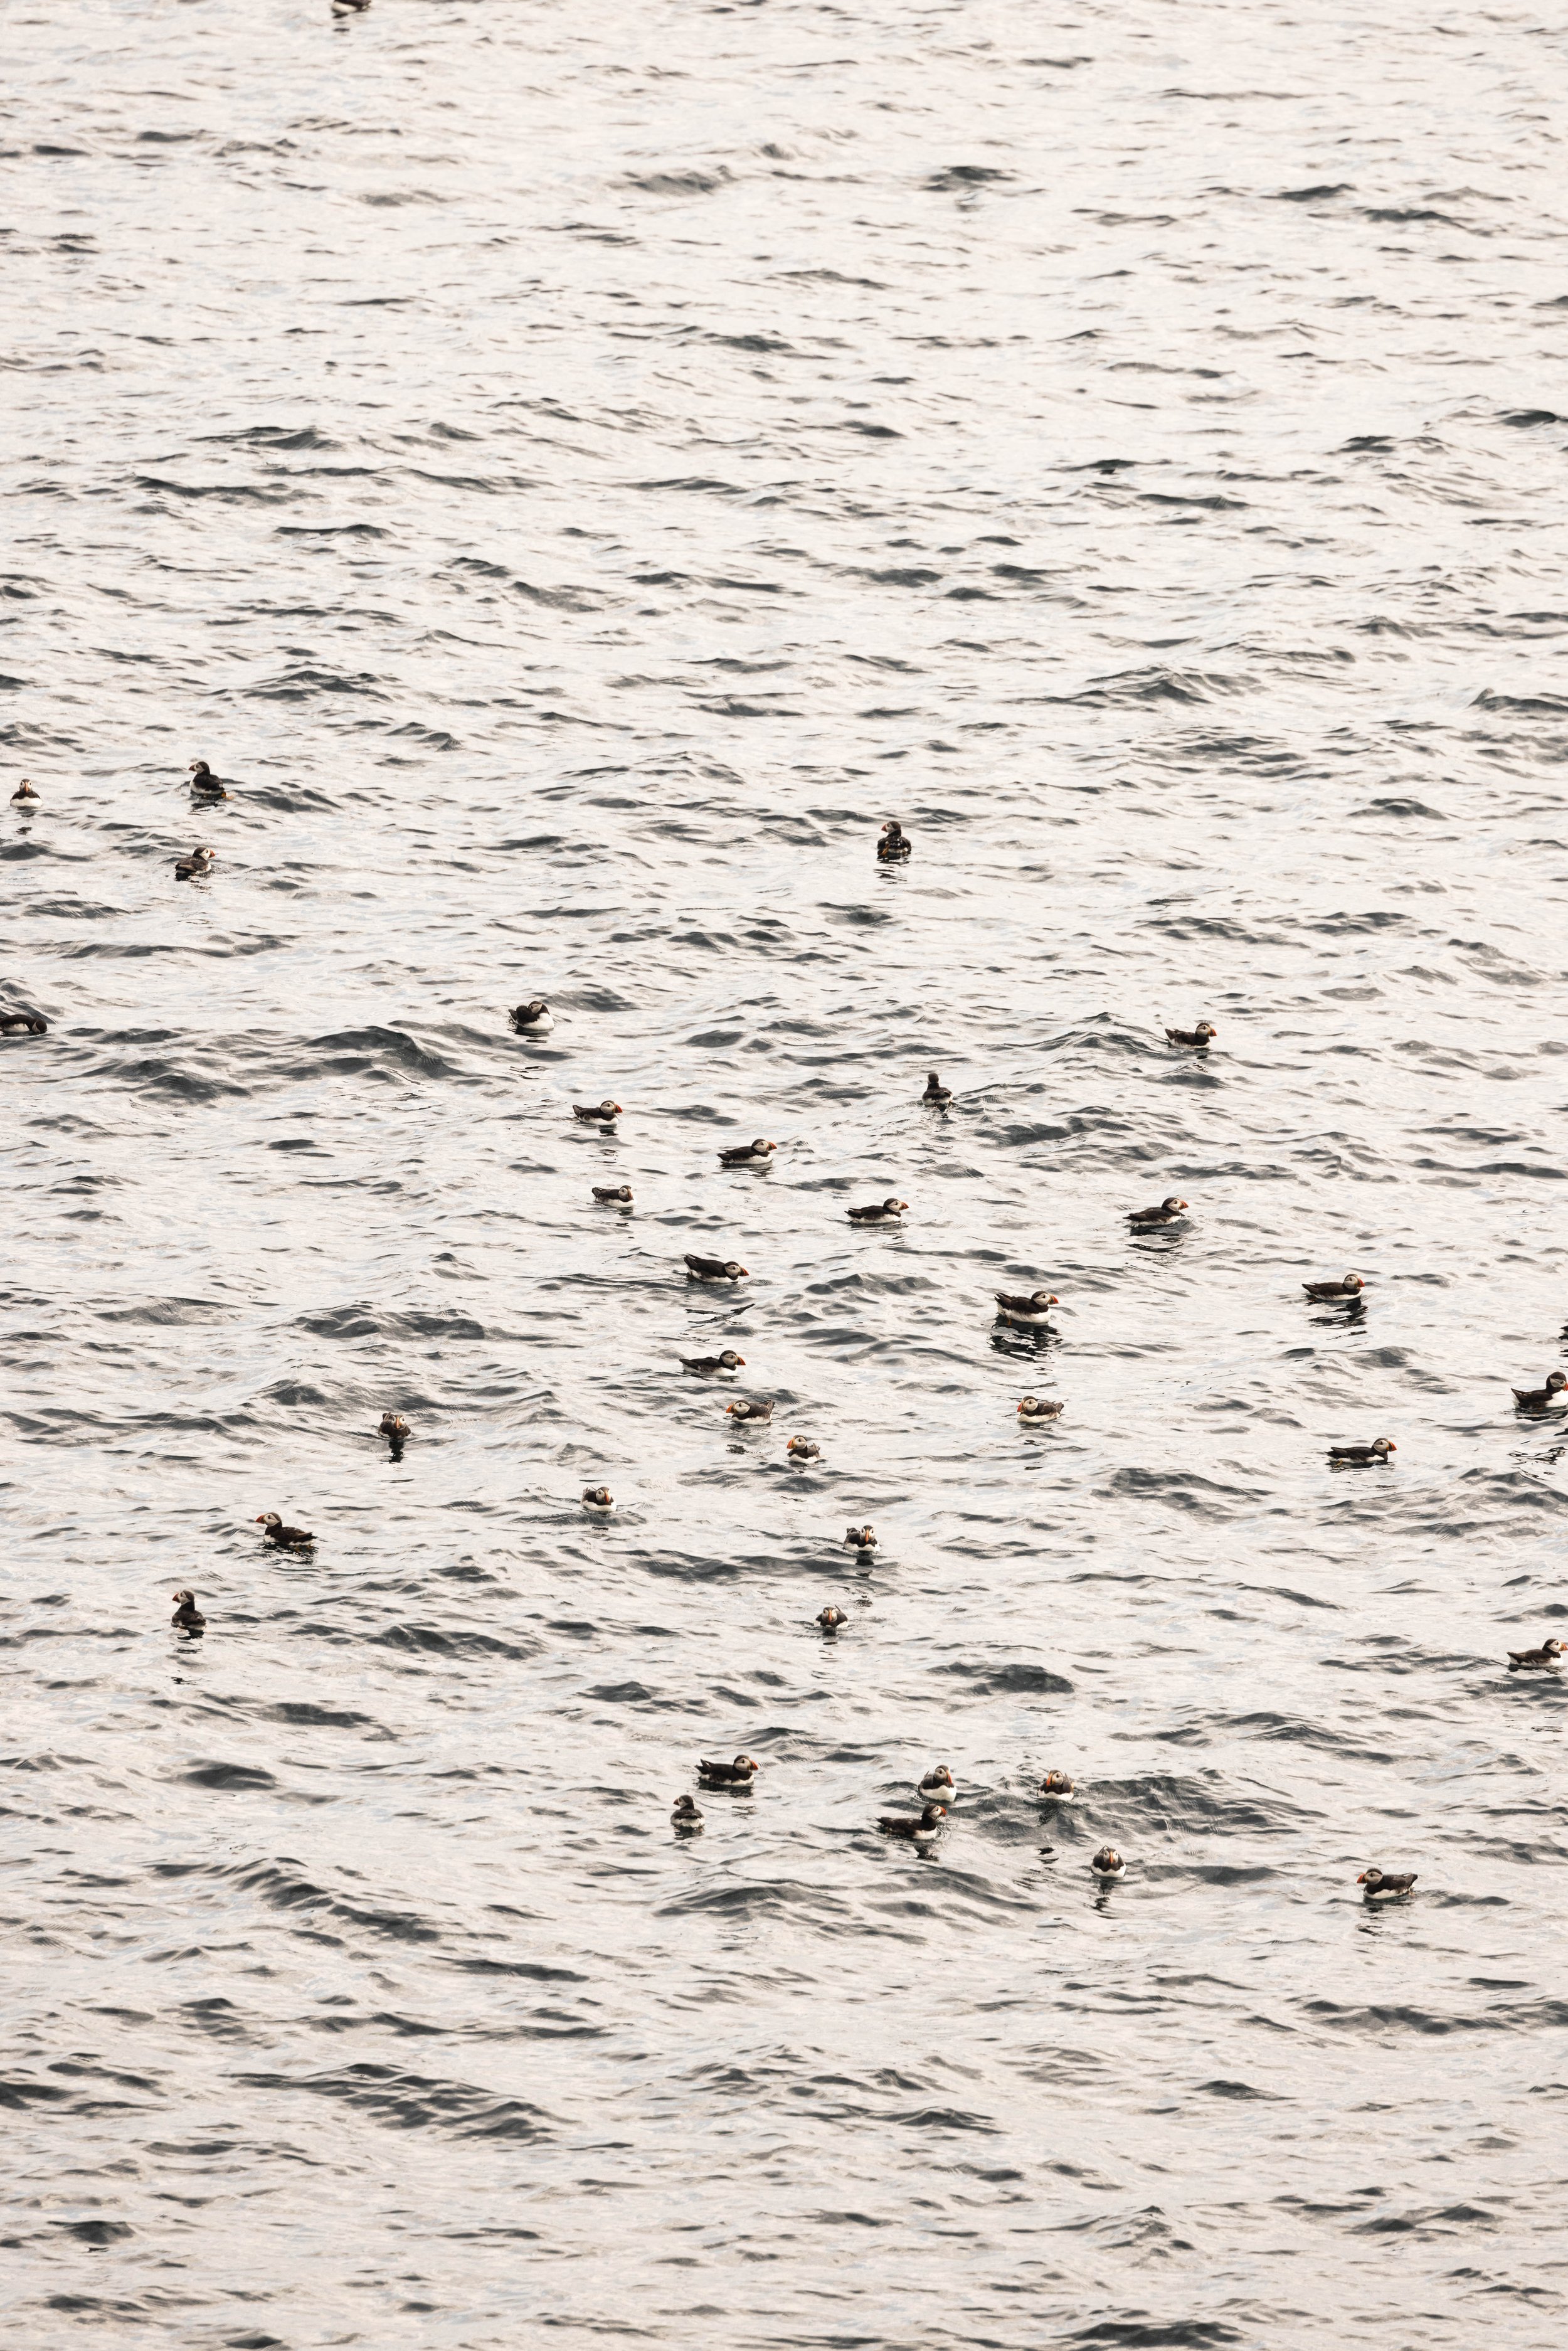 puffins on the water_.jpg